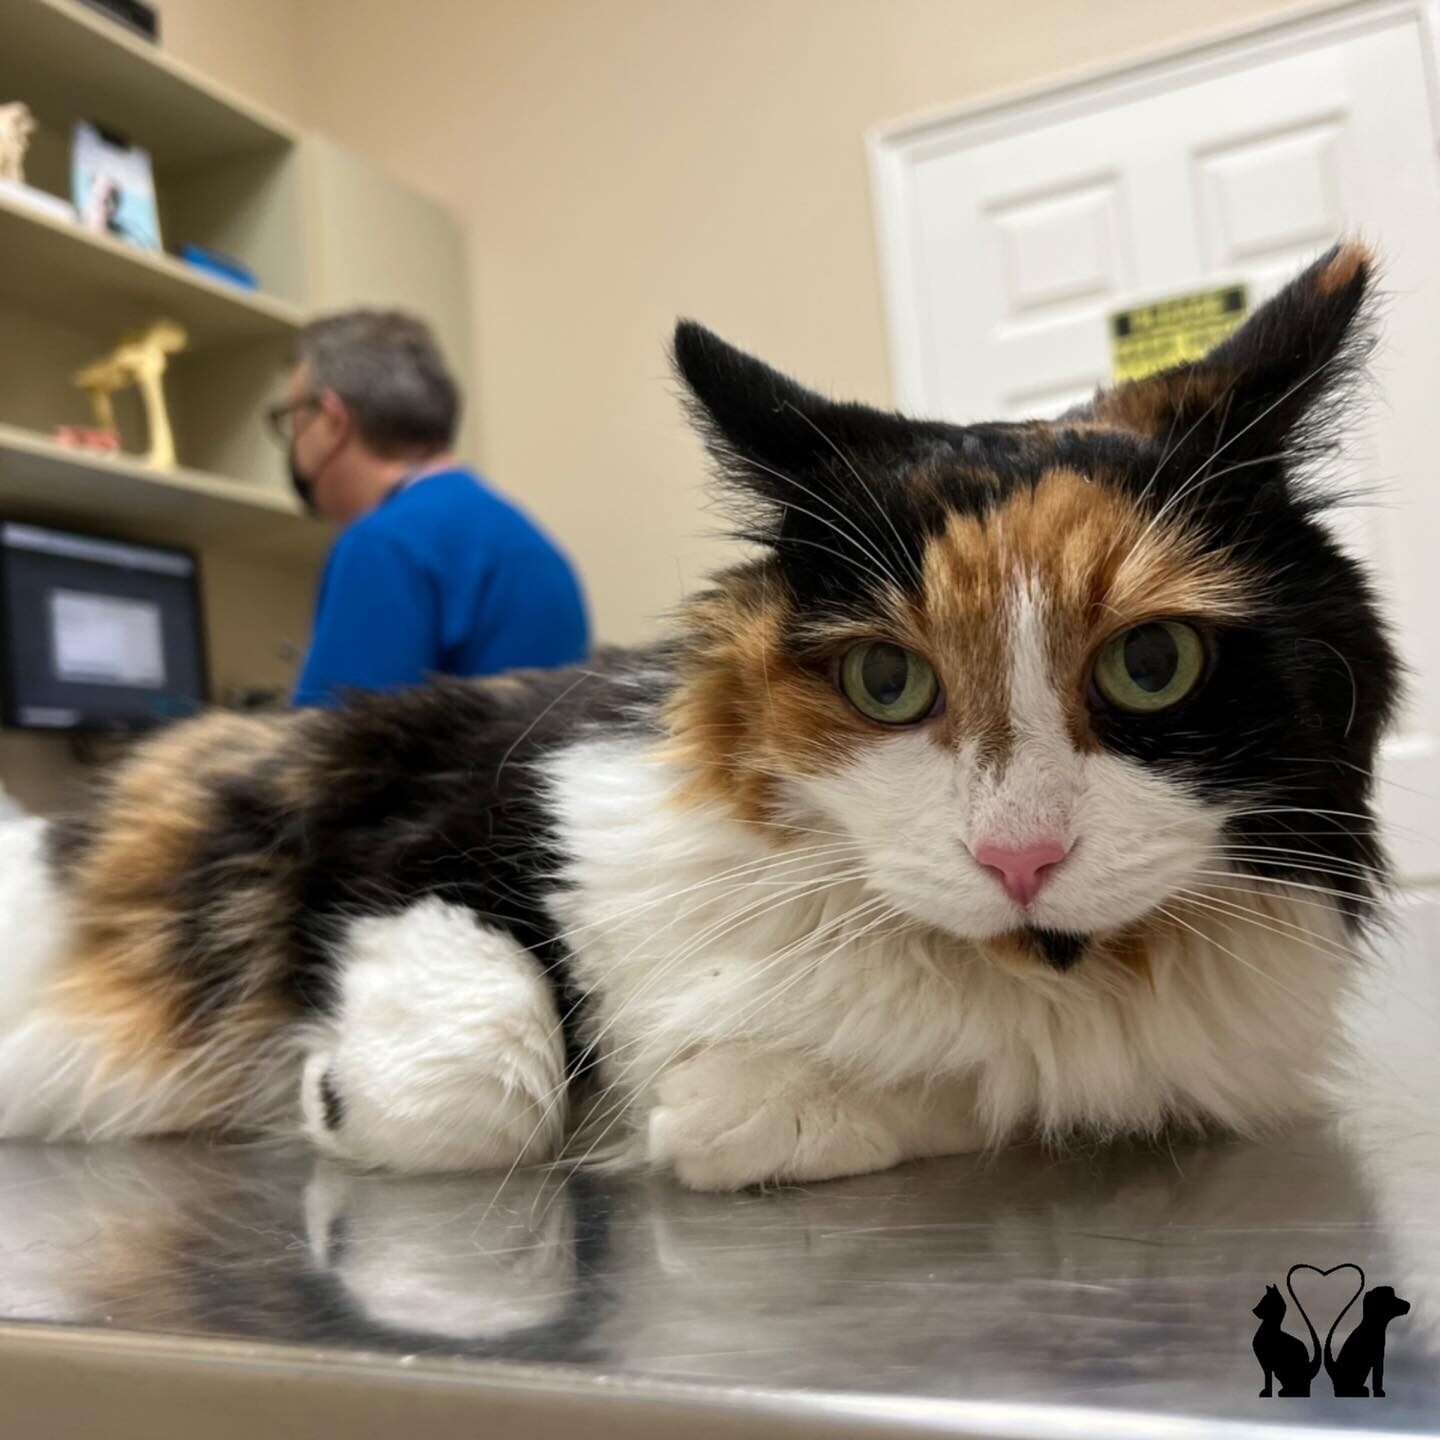 Cat At Clinic With Doctor In The Background